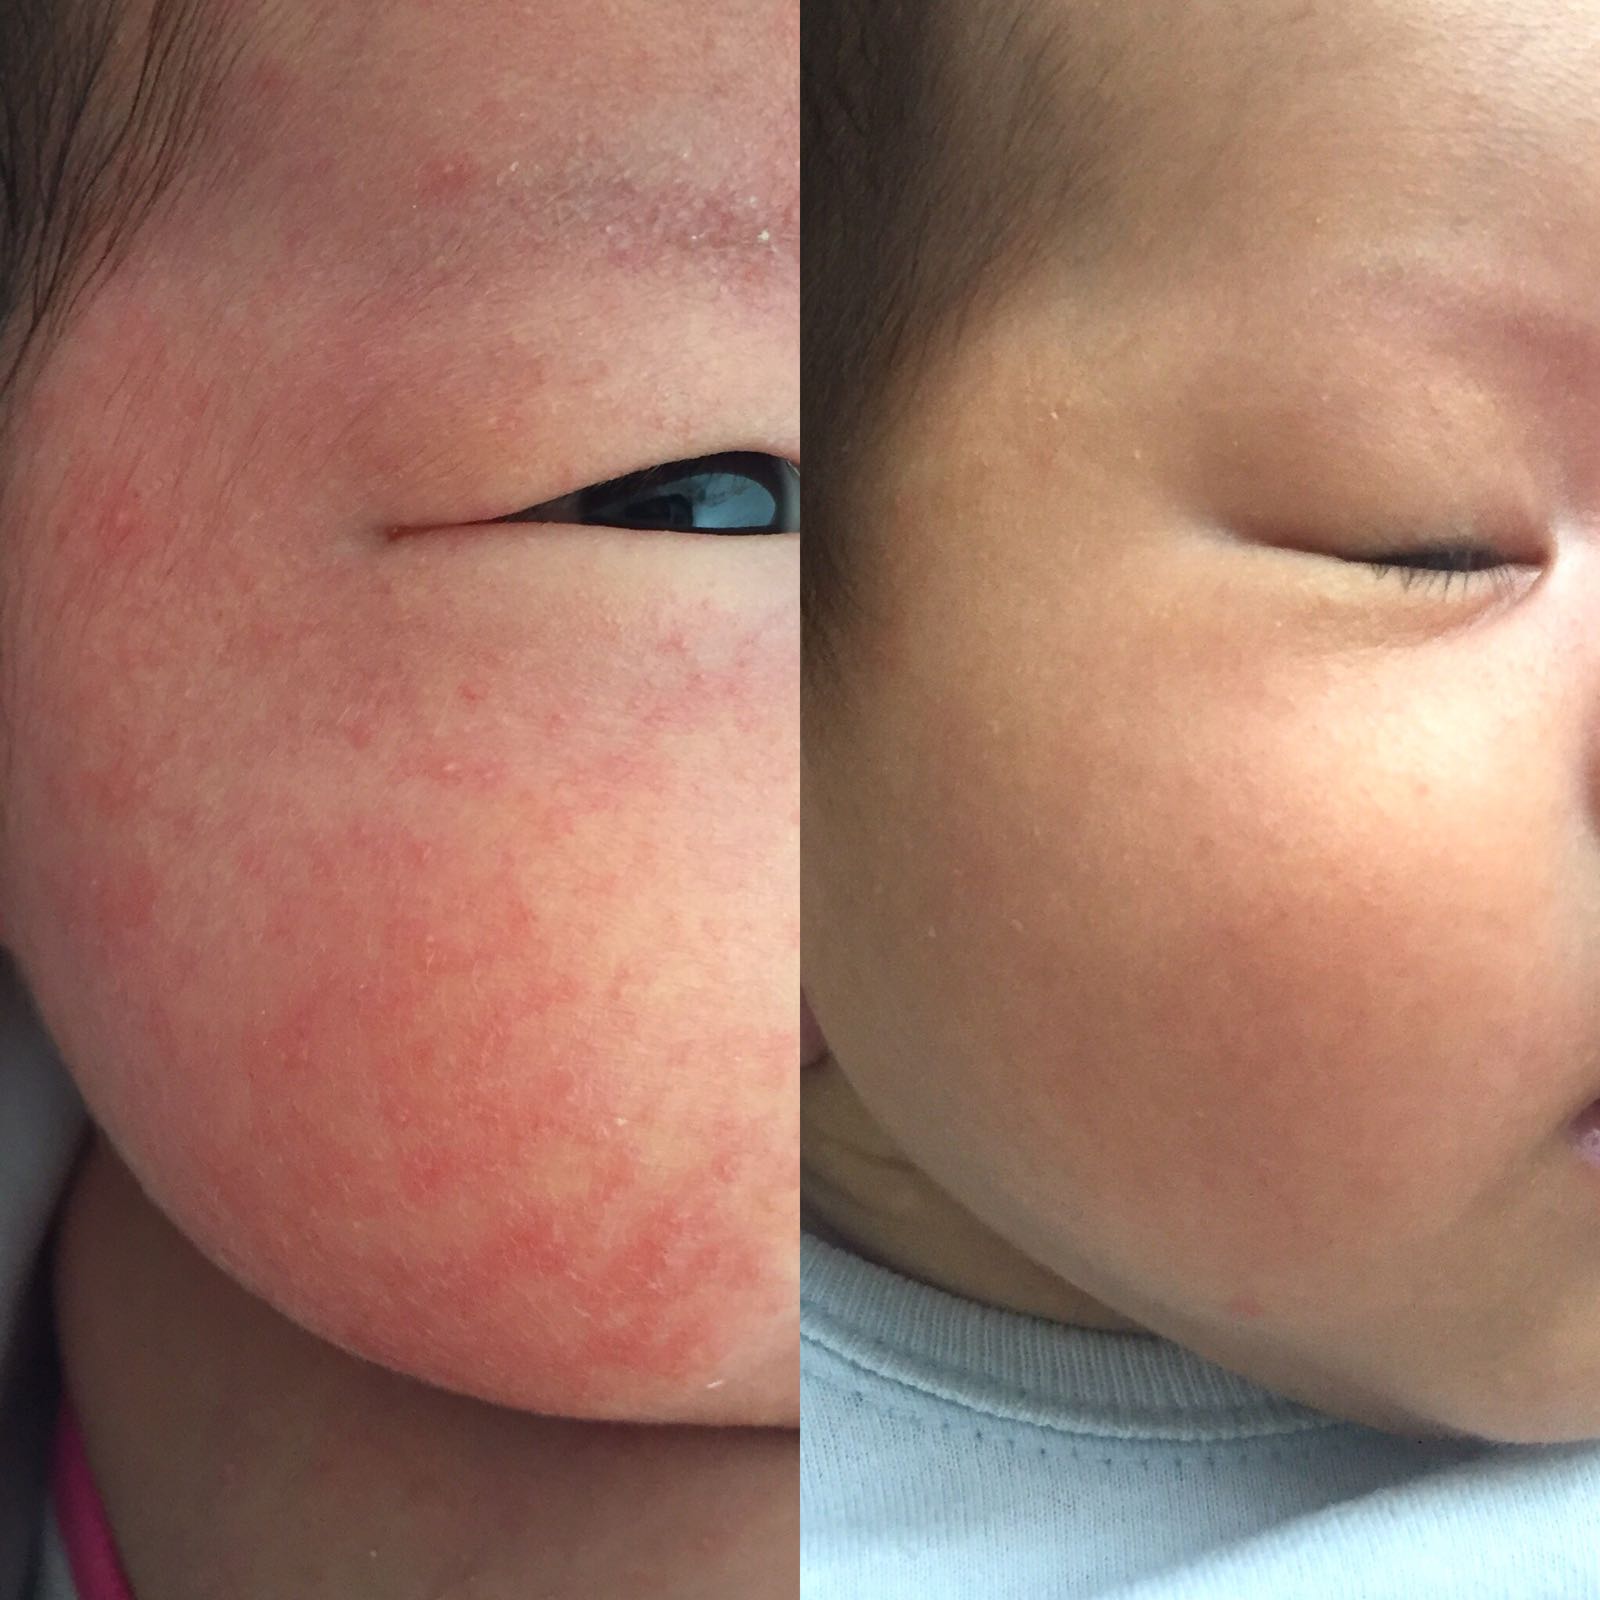 Best Natural Treatment for Baby Eczema and Rashes